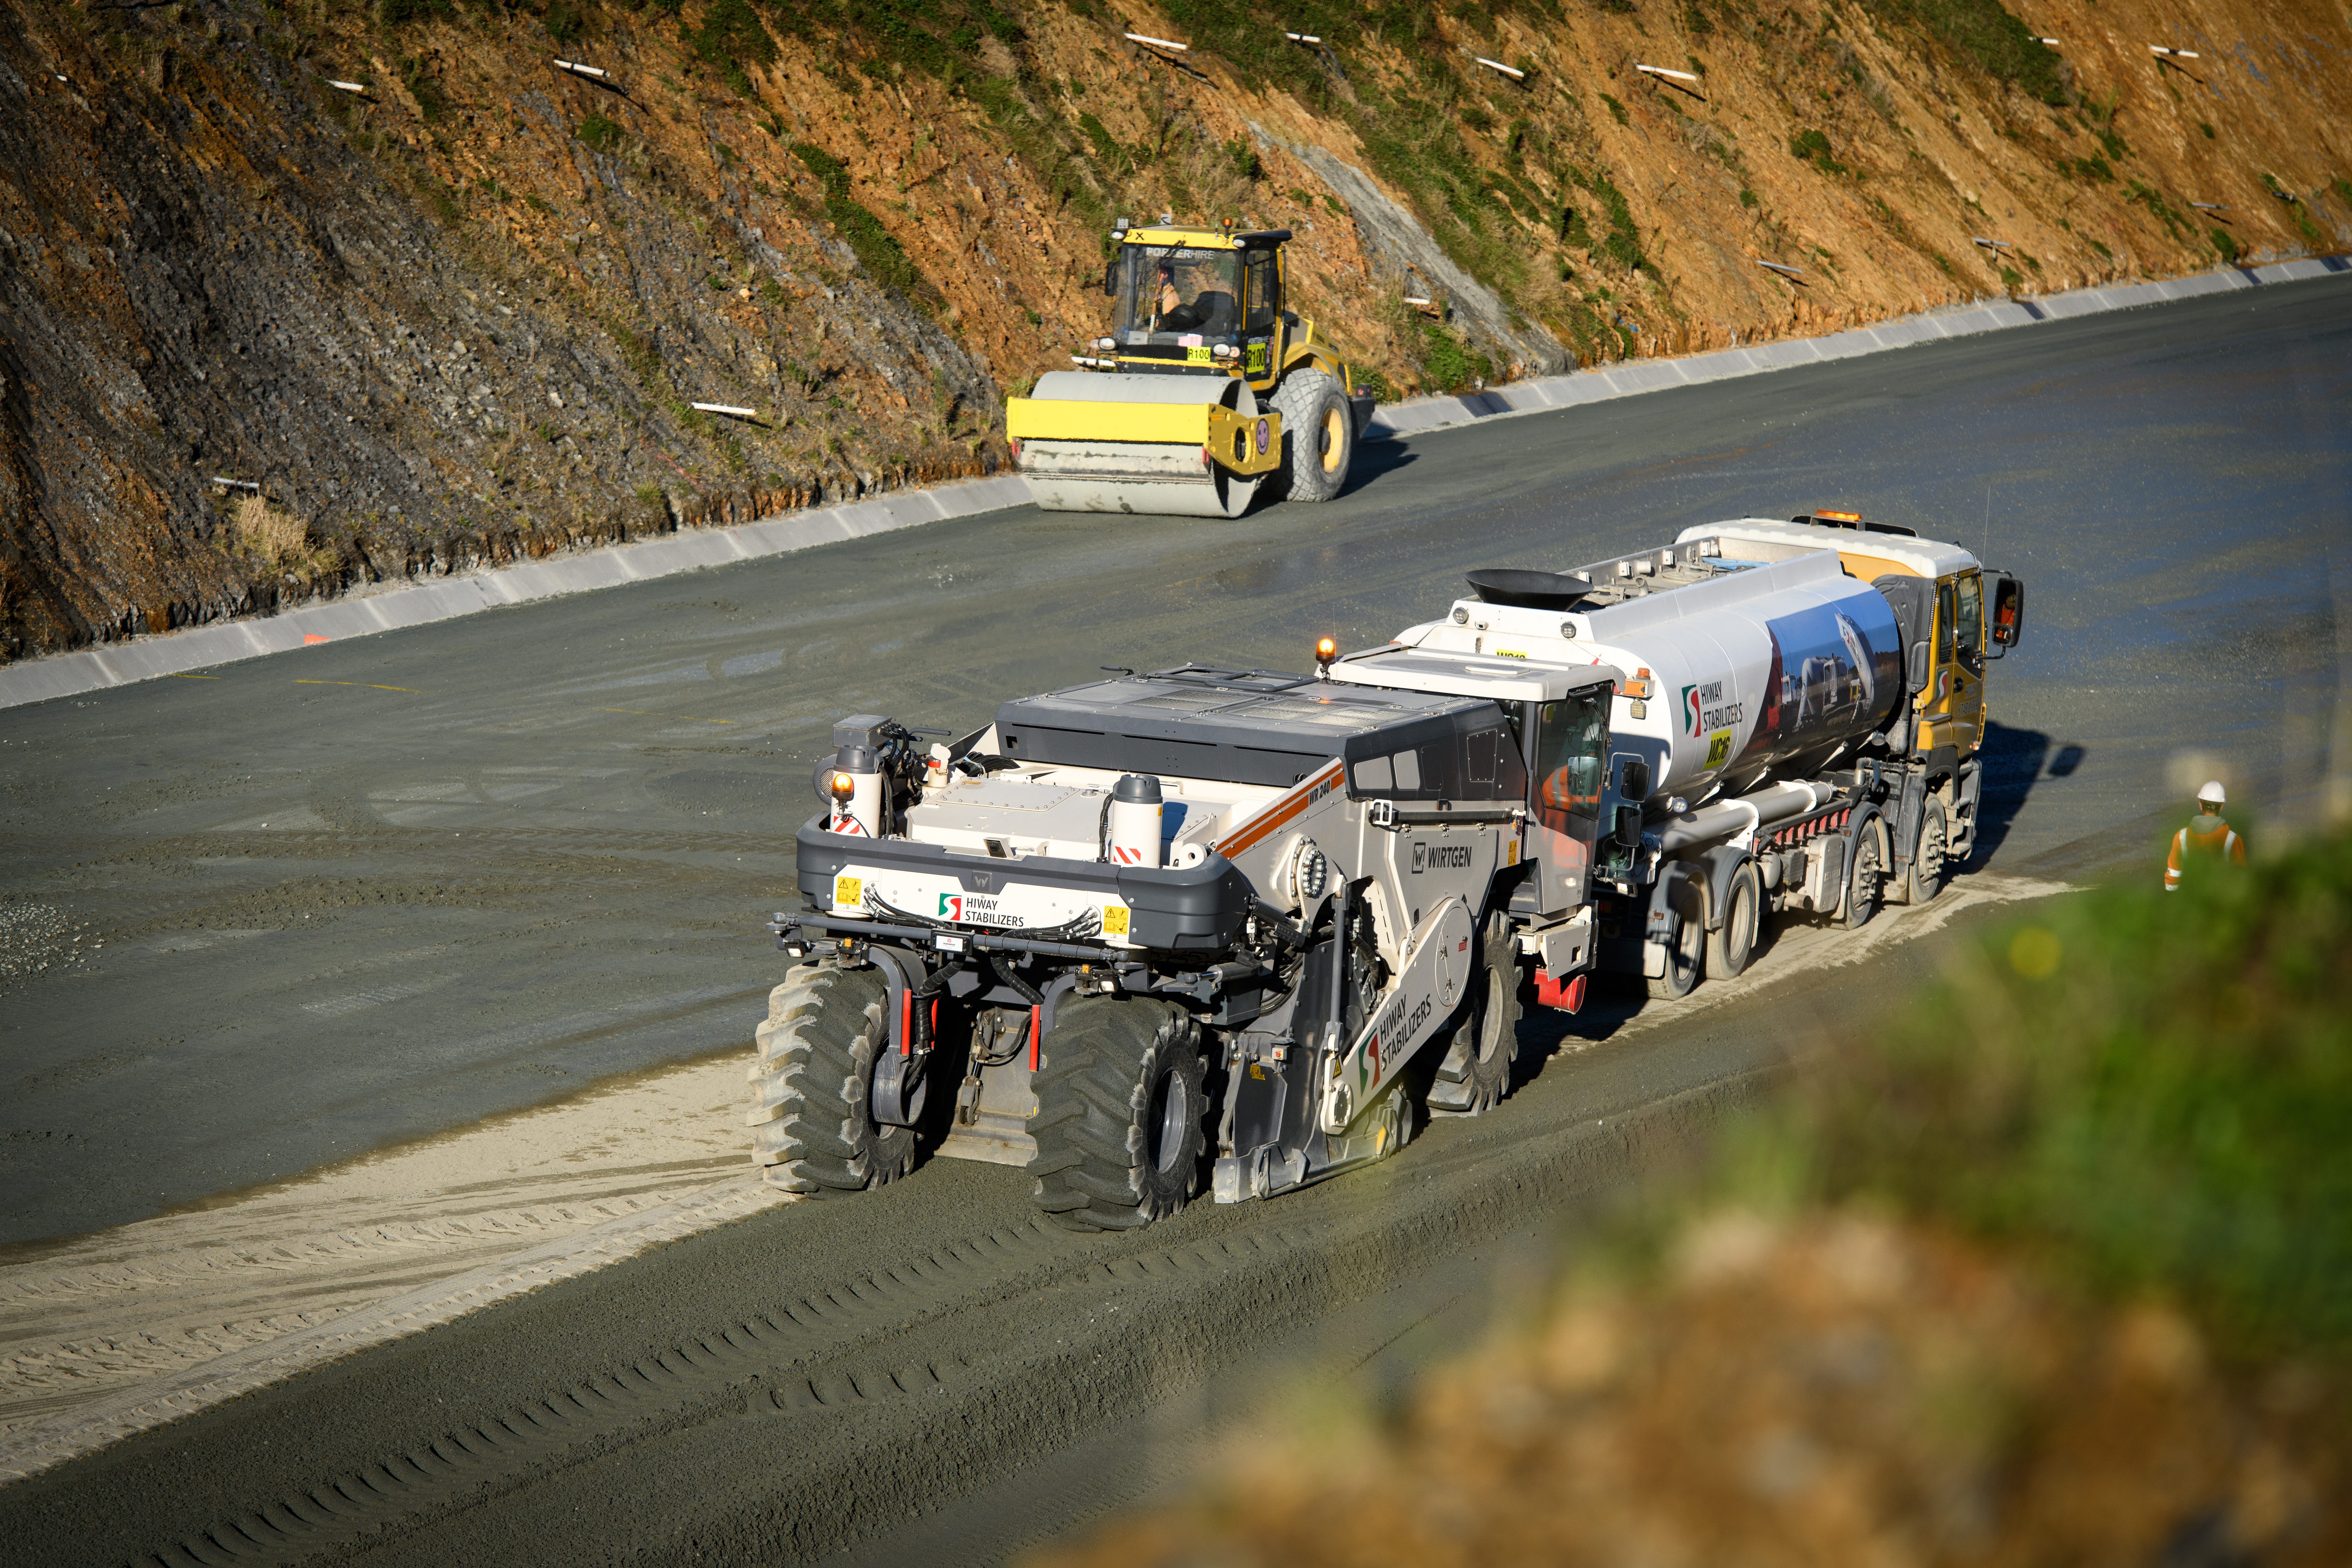 Stabiliser following water cart moves over surface mixing cement with aggregate